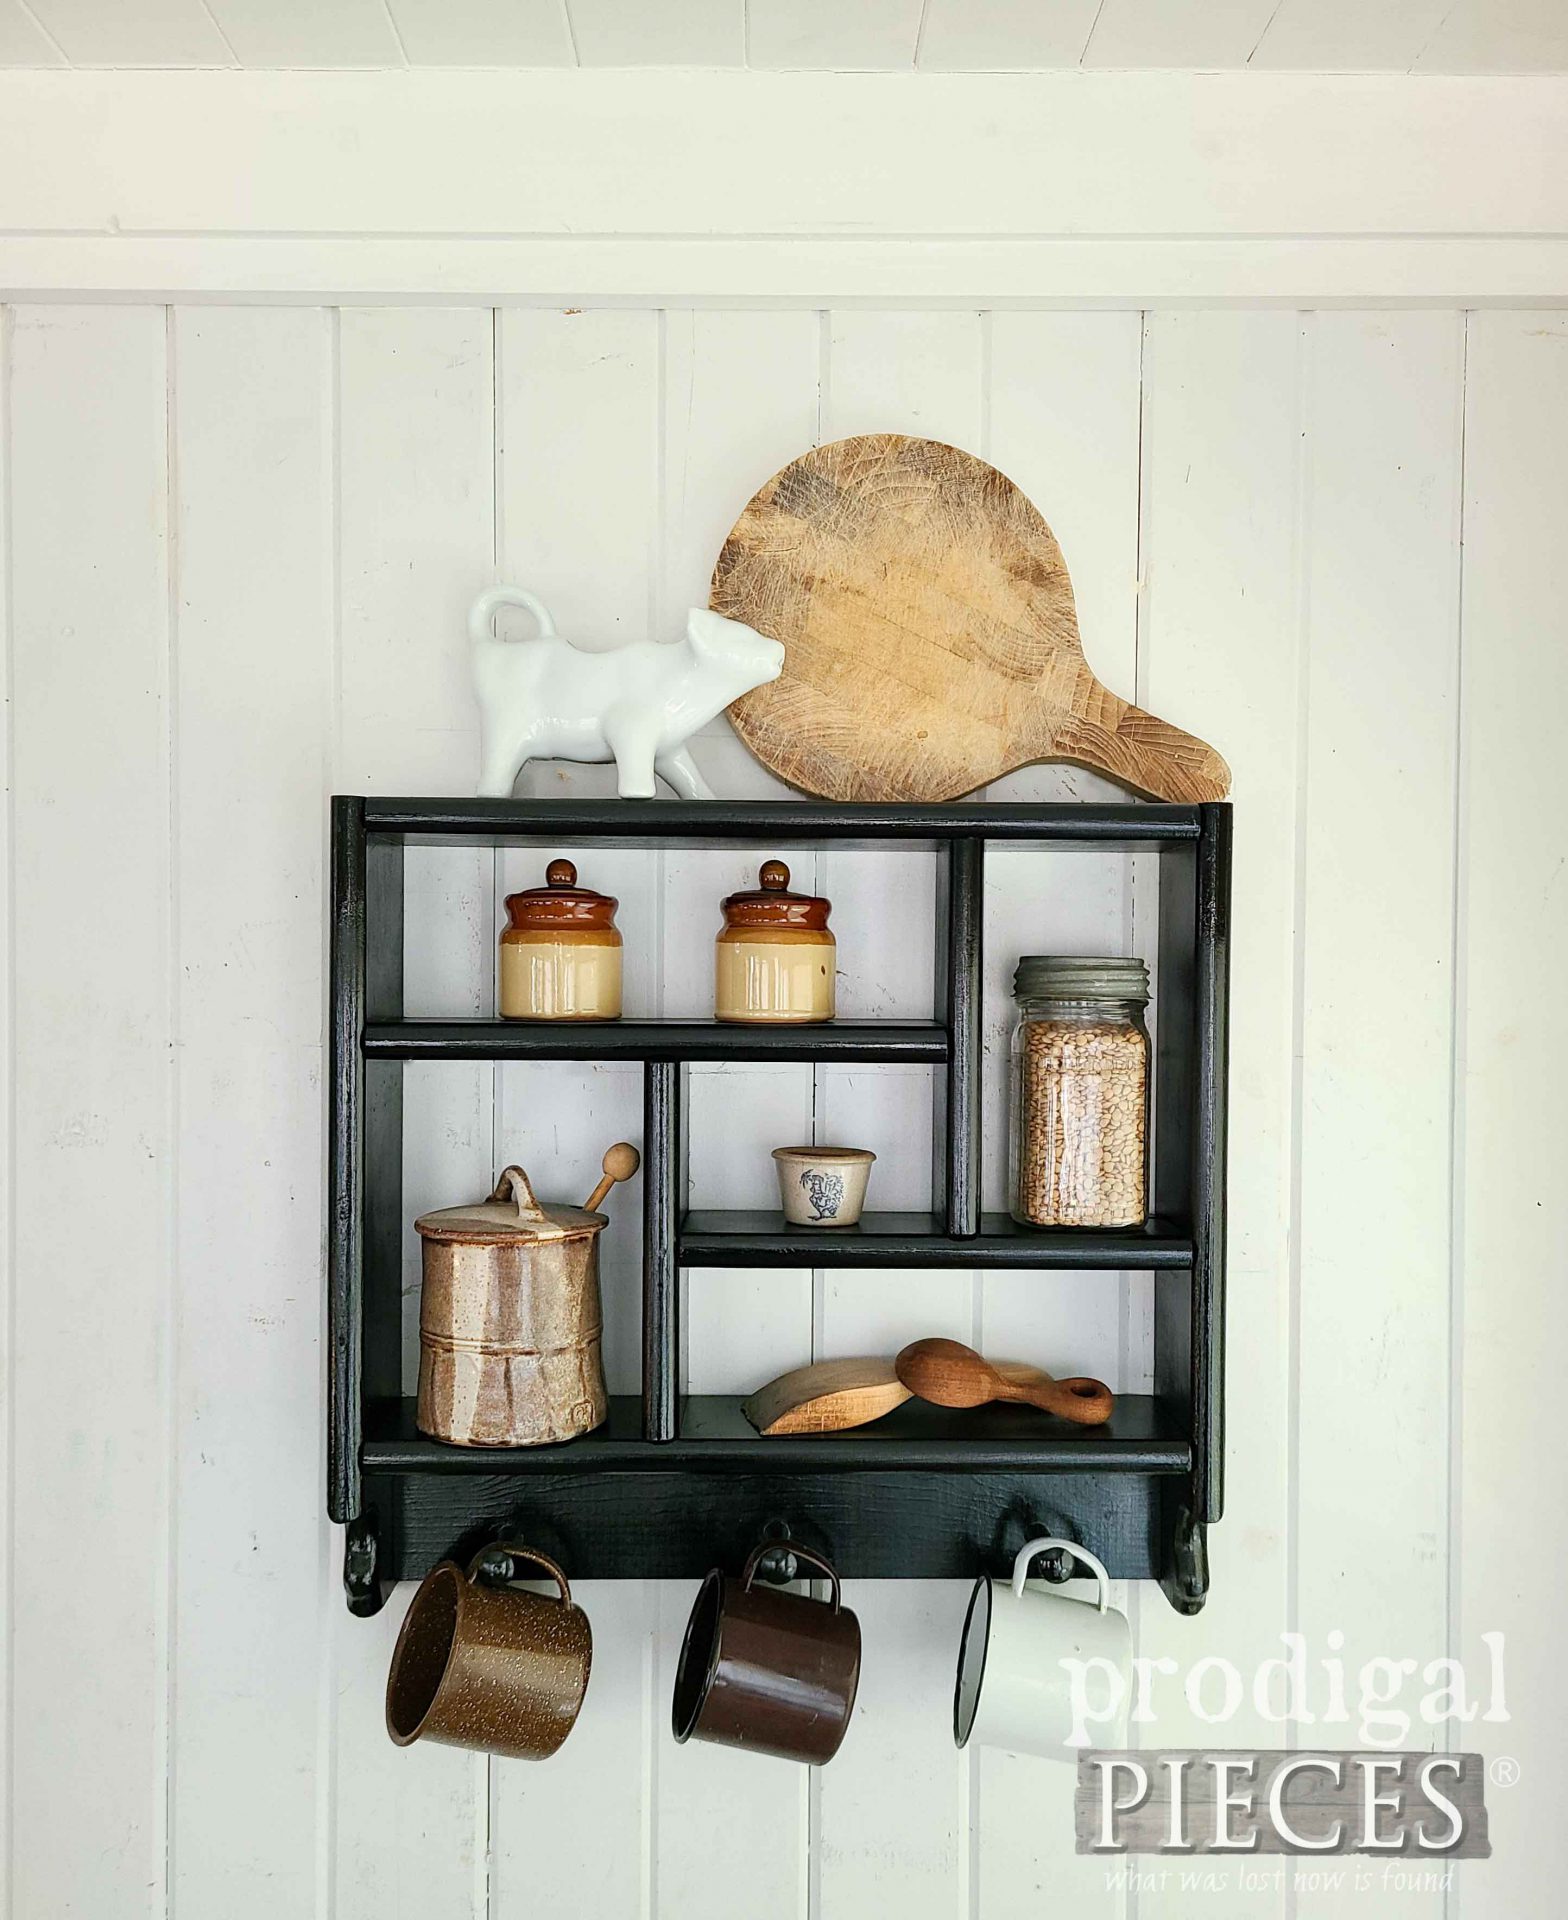 Modern Farmhouse Peg Shelf Makeover from Vintage Country Shelf by Larissa of Prodigal Pieces | prodigalpieces.com #prodigalpieces #farmhouse #homedecor #diy